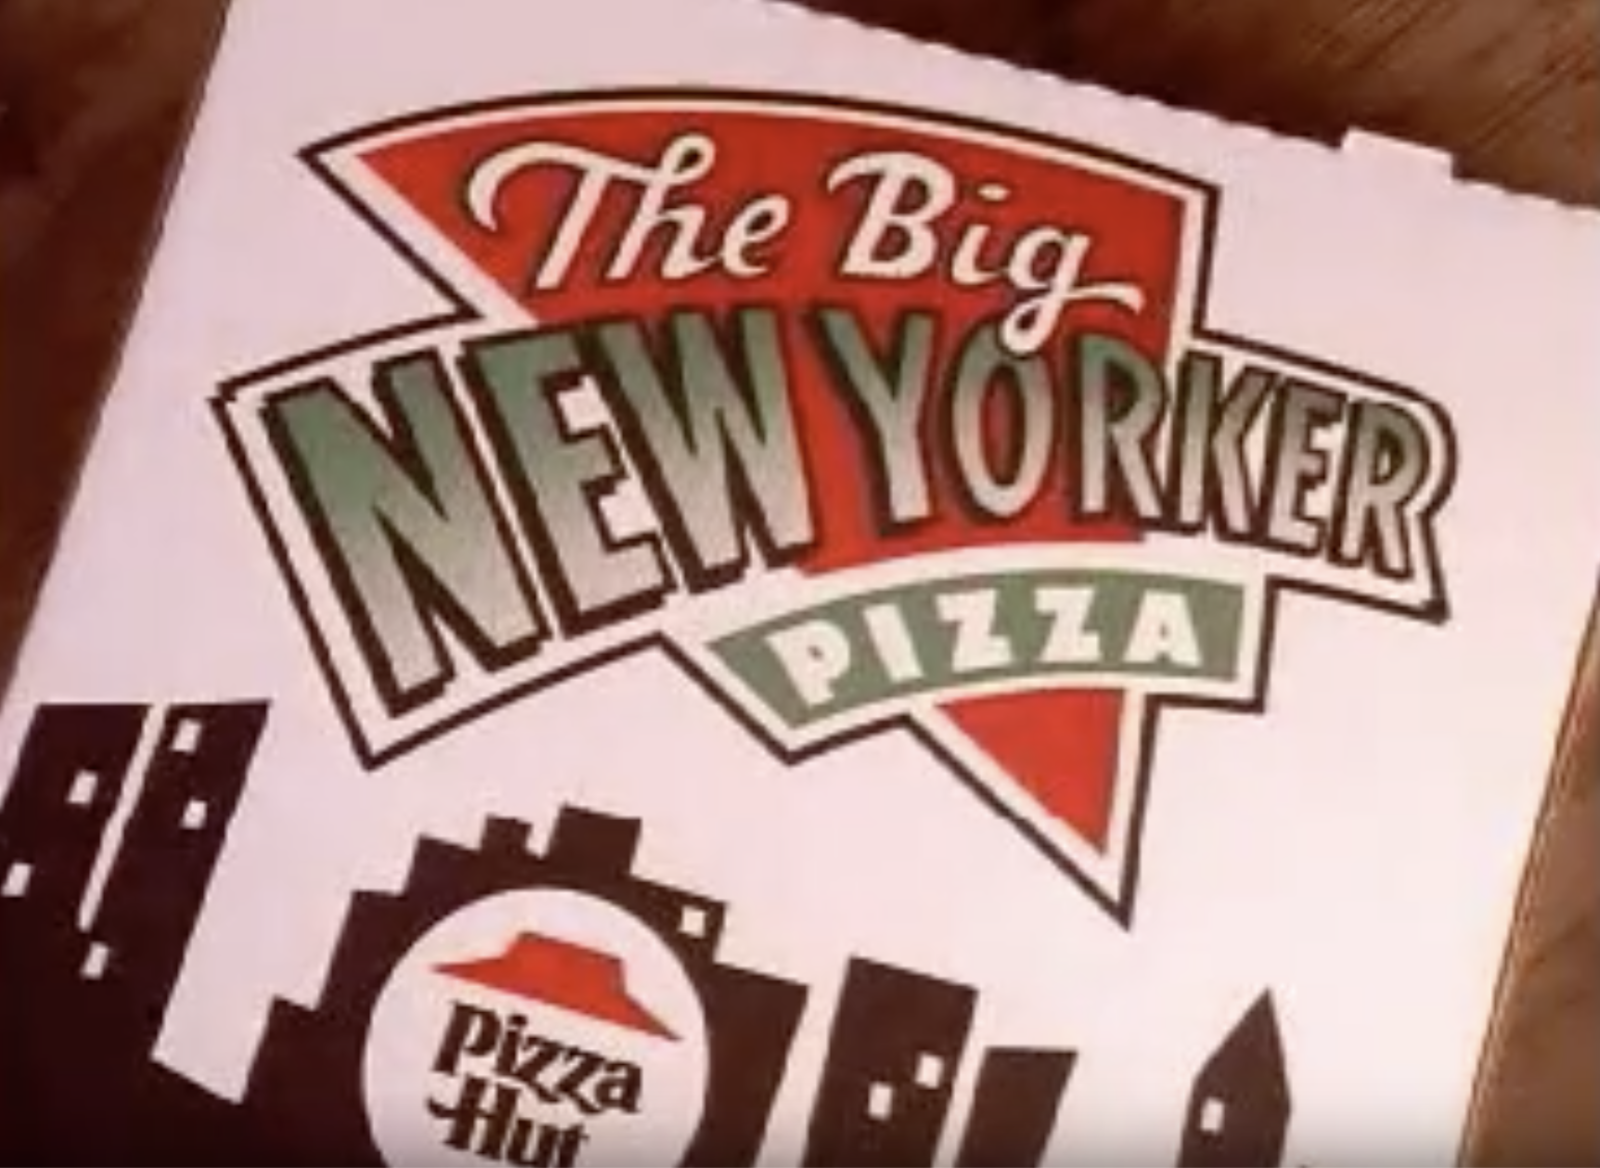 The Big New Yorker pizza